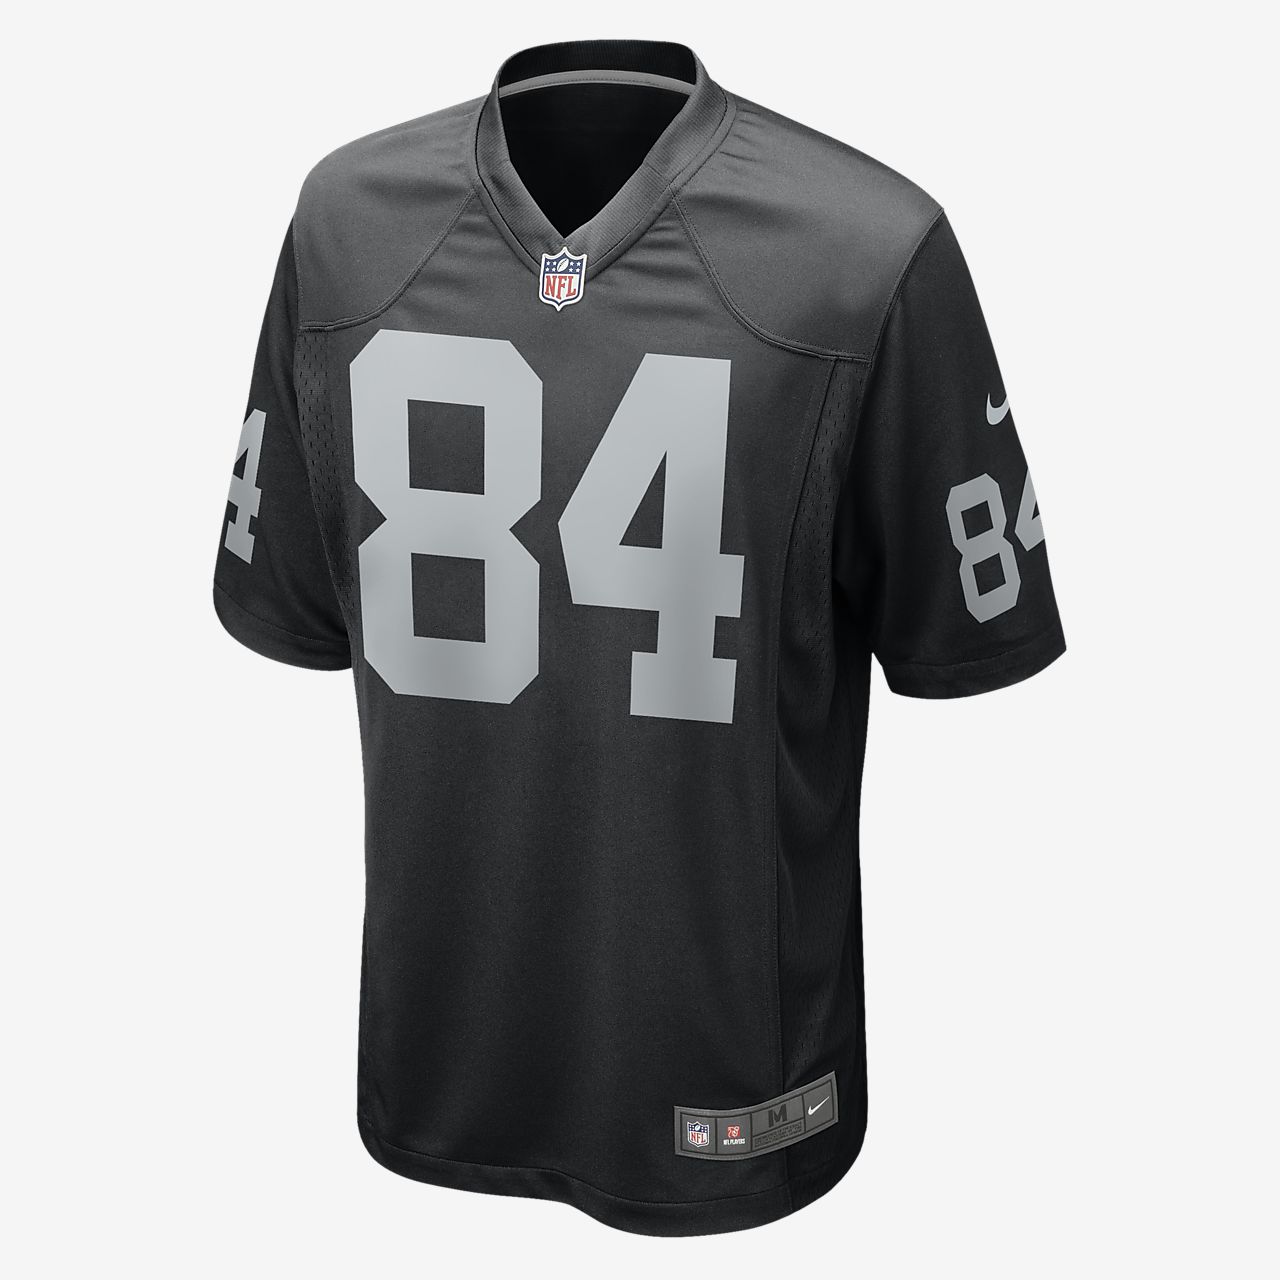 what color jerseys are the raiders wearing today